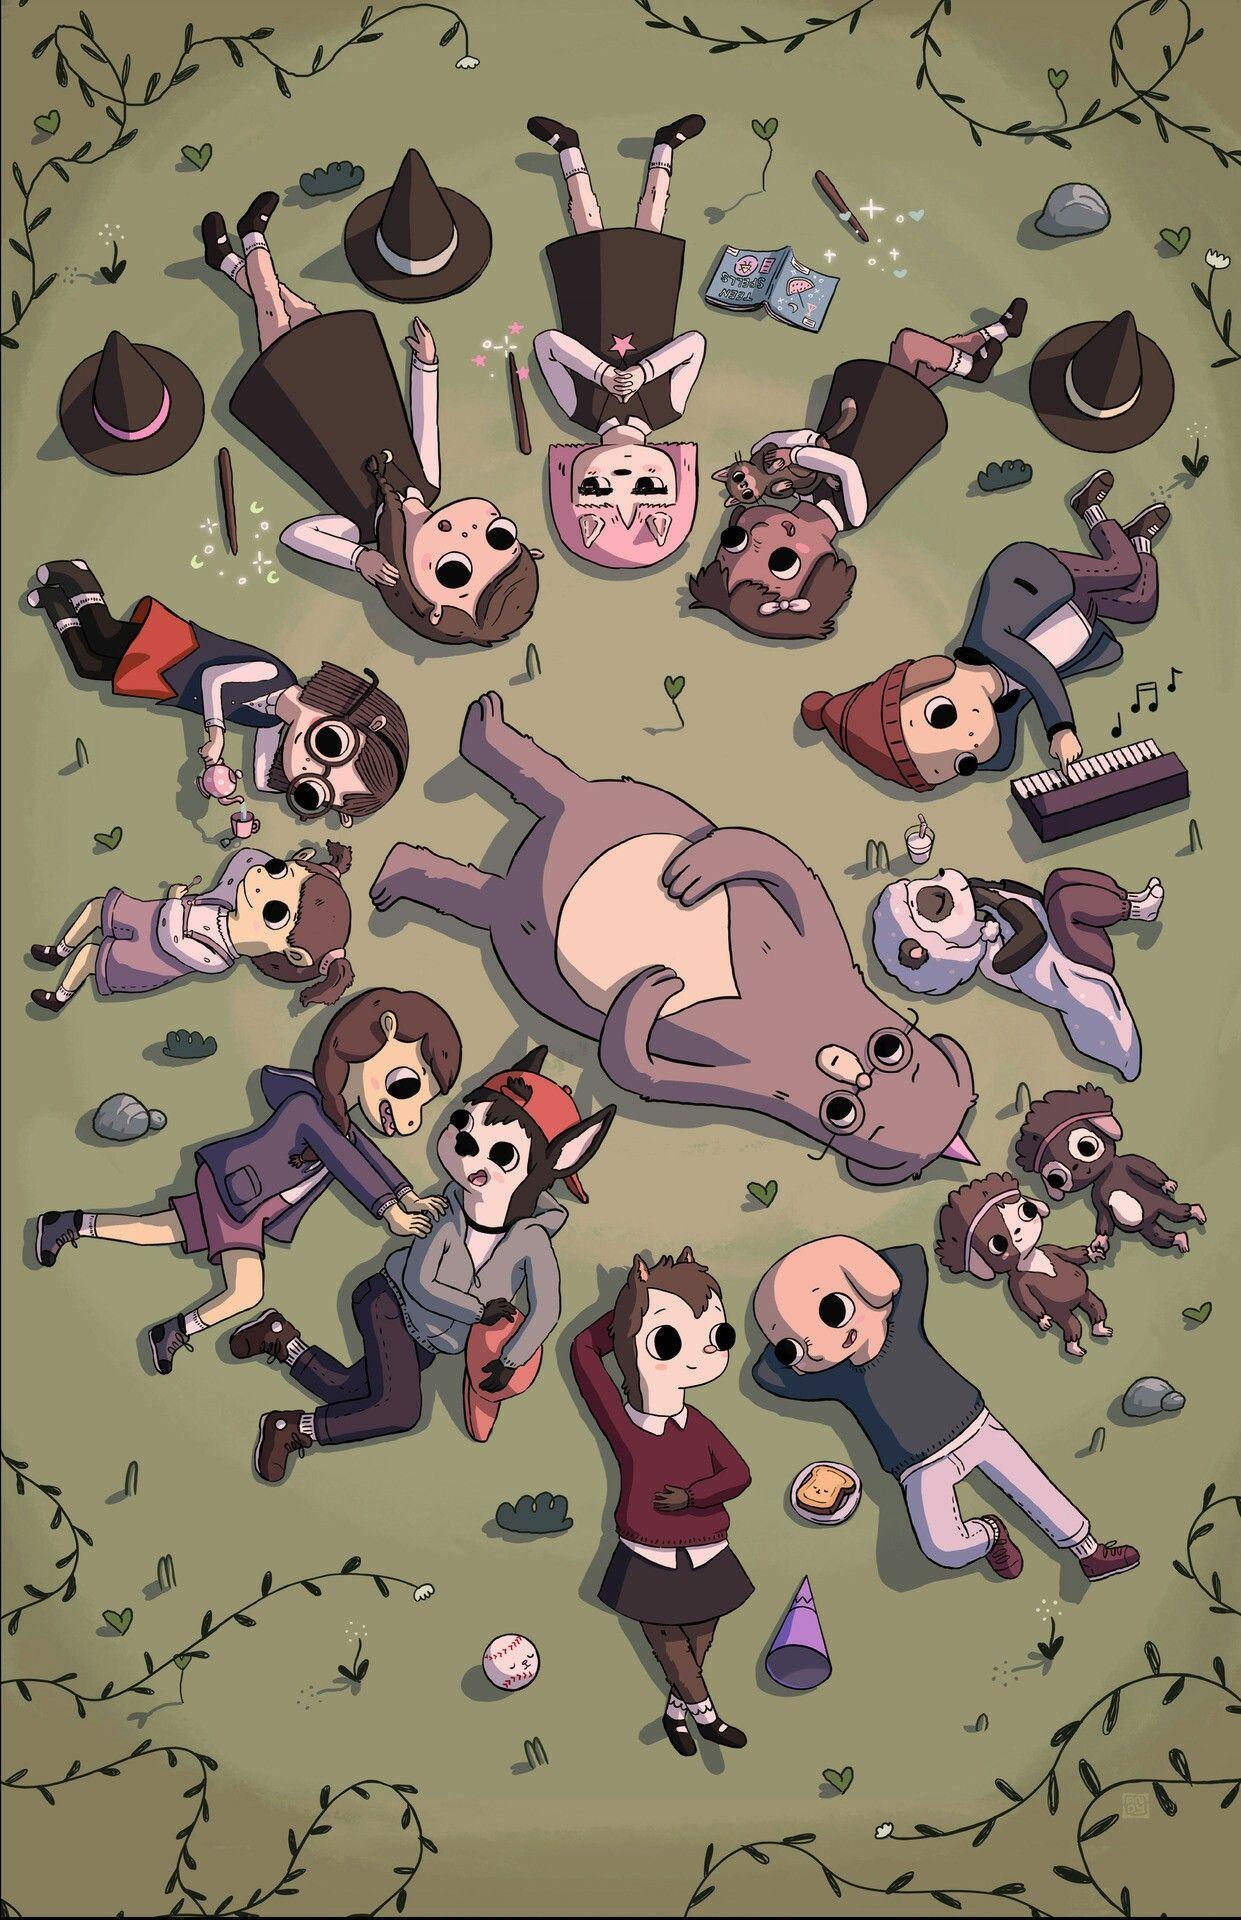 A collection of characters from Over the Garden Wall. - Camping